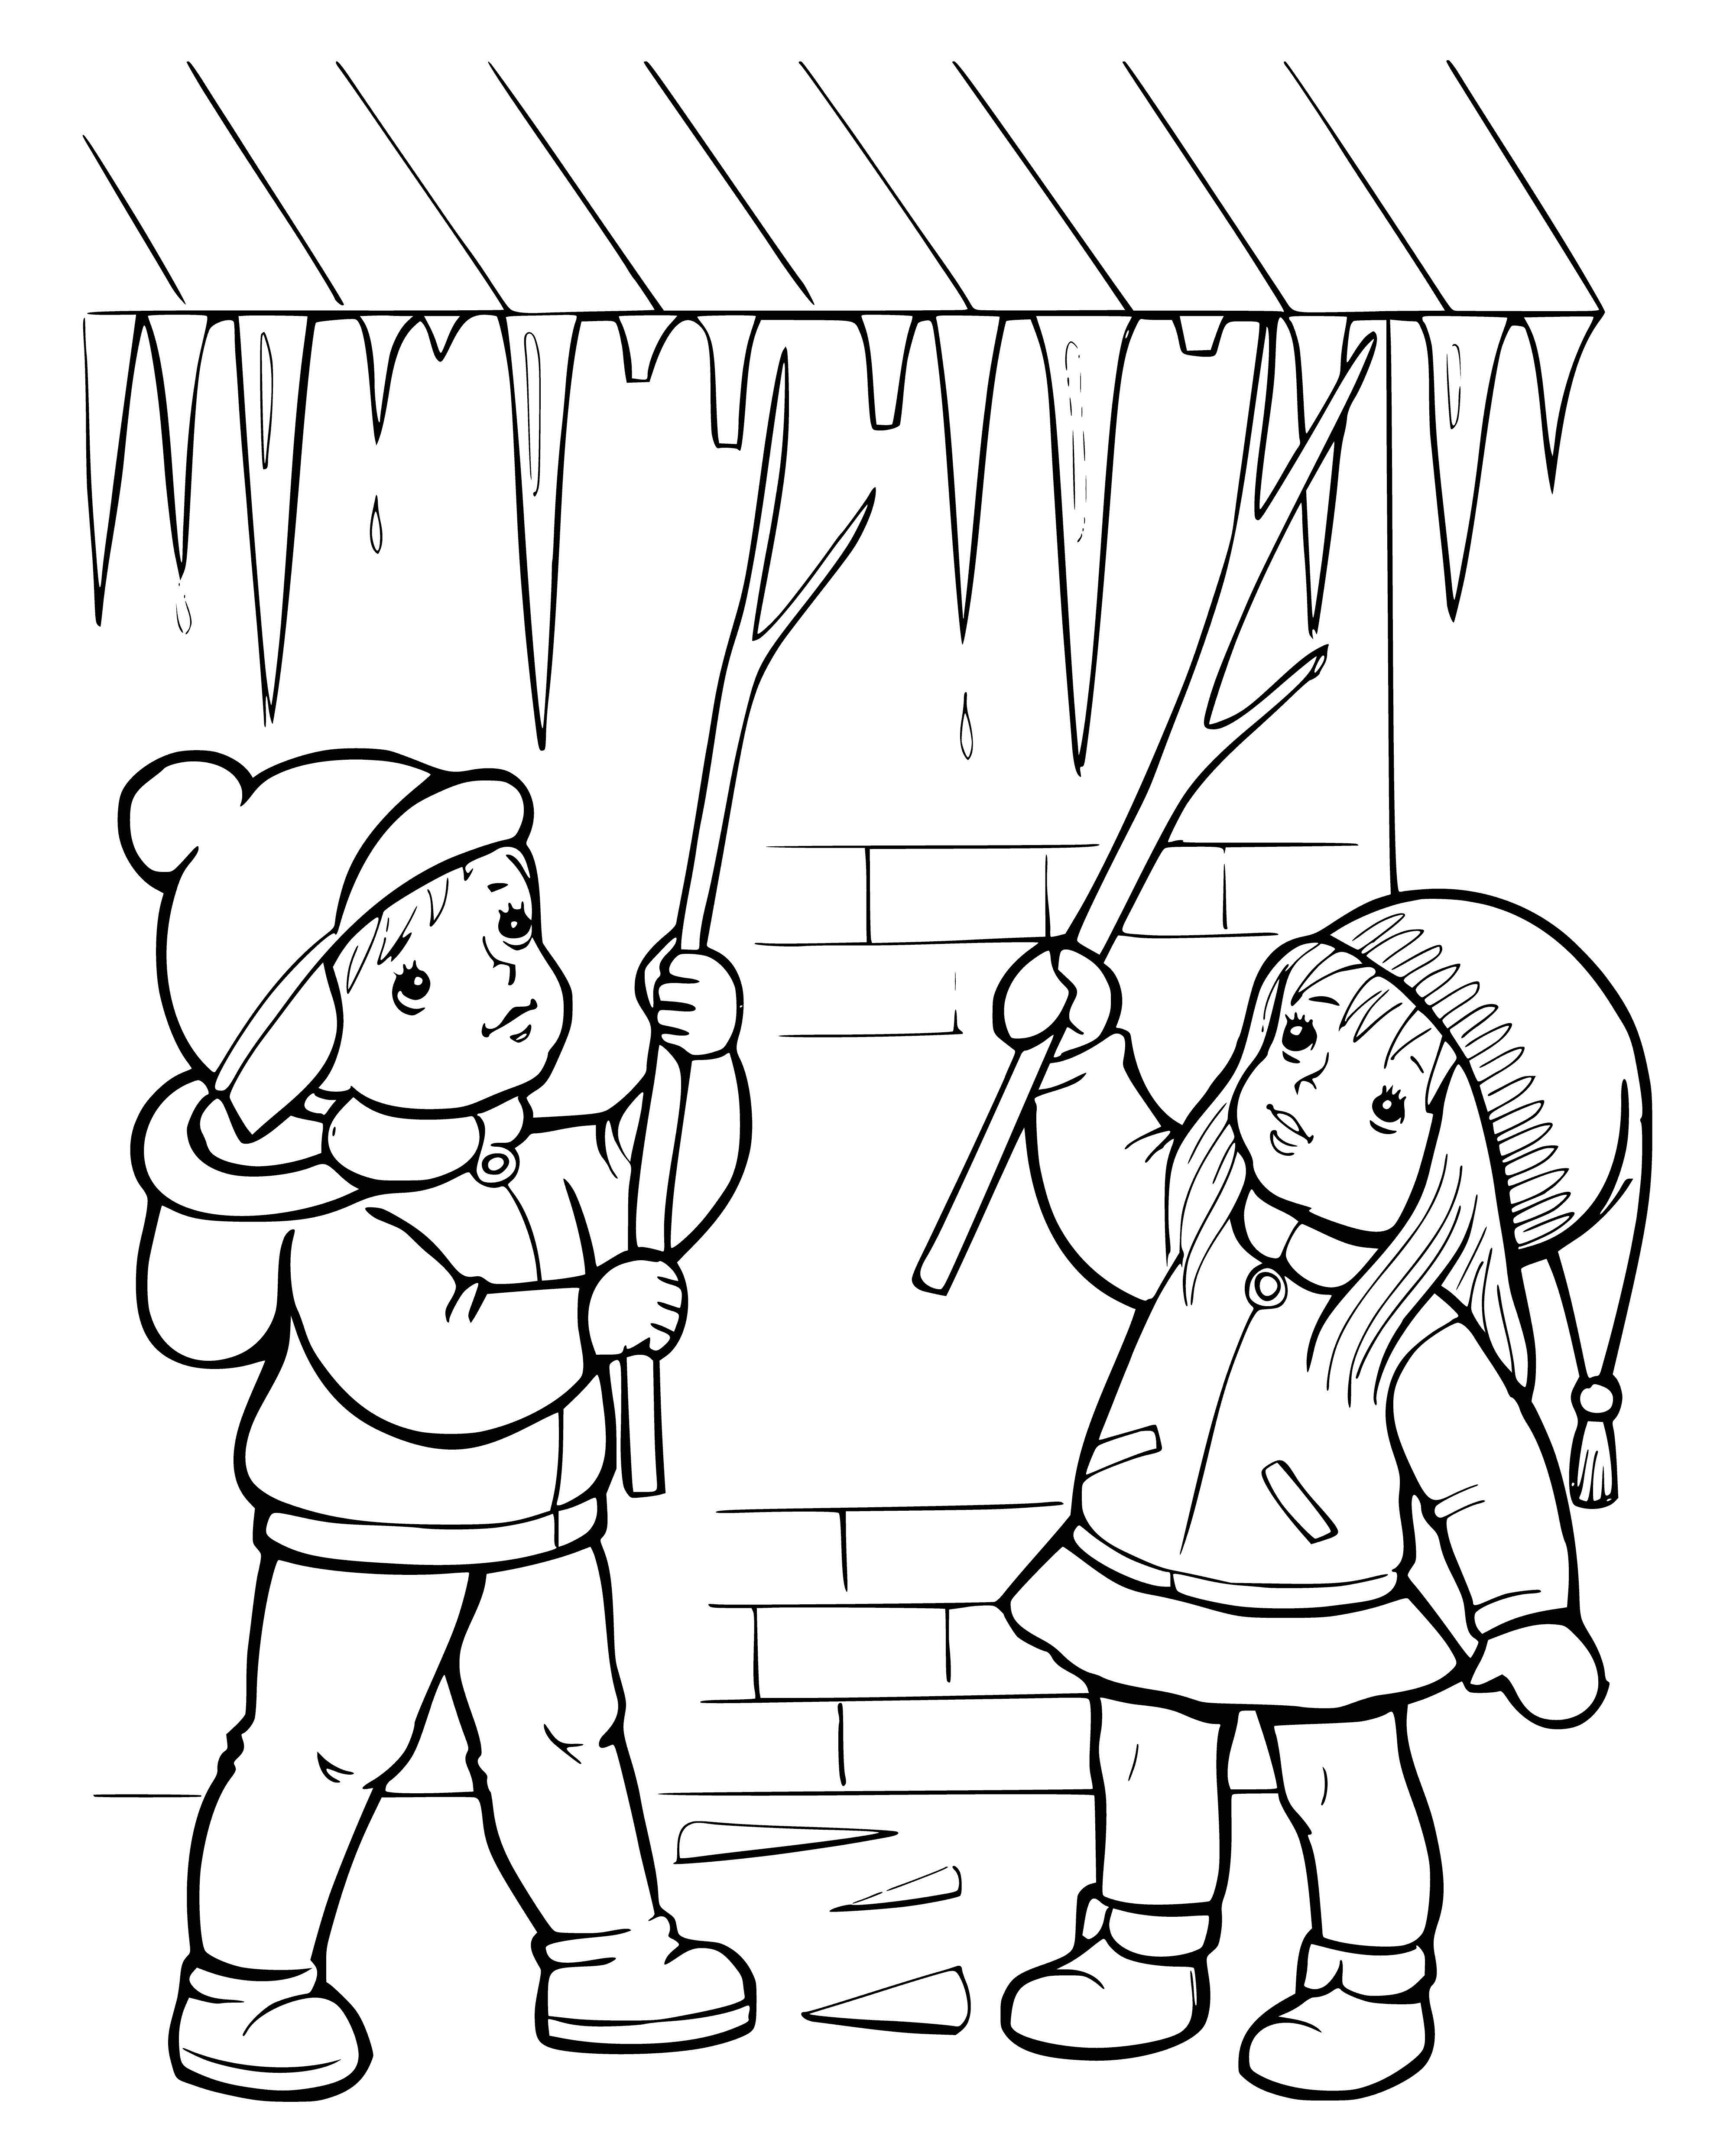 coloring page: Coloring pages show diff. icicles melted, dripping, hanging from trees/roofs.